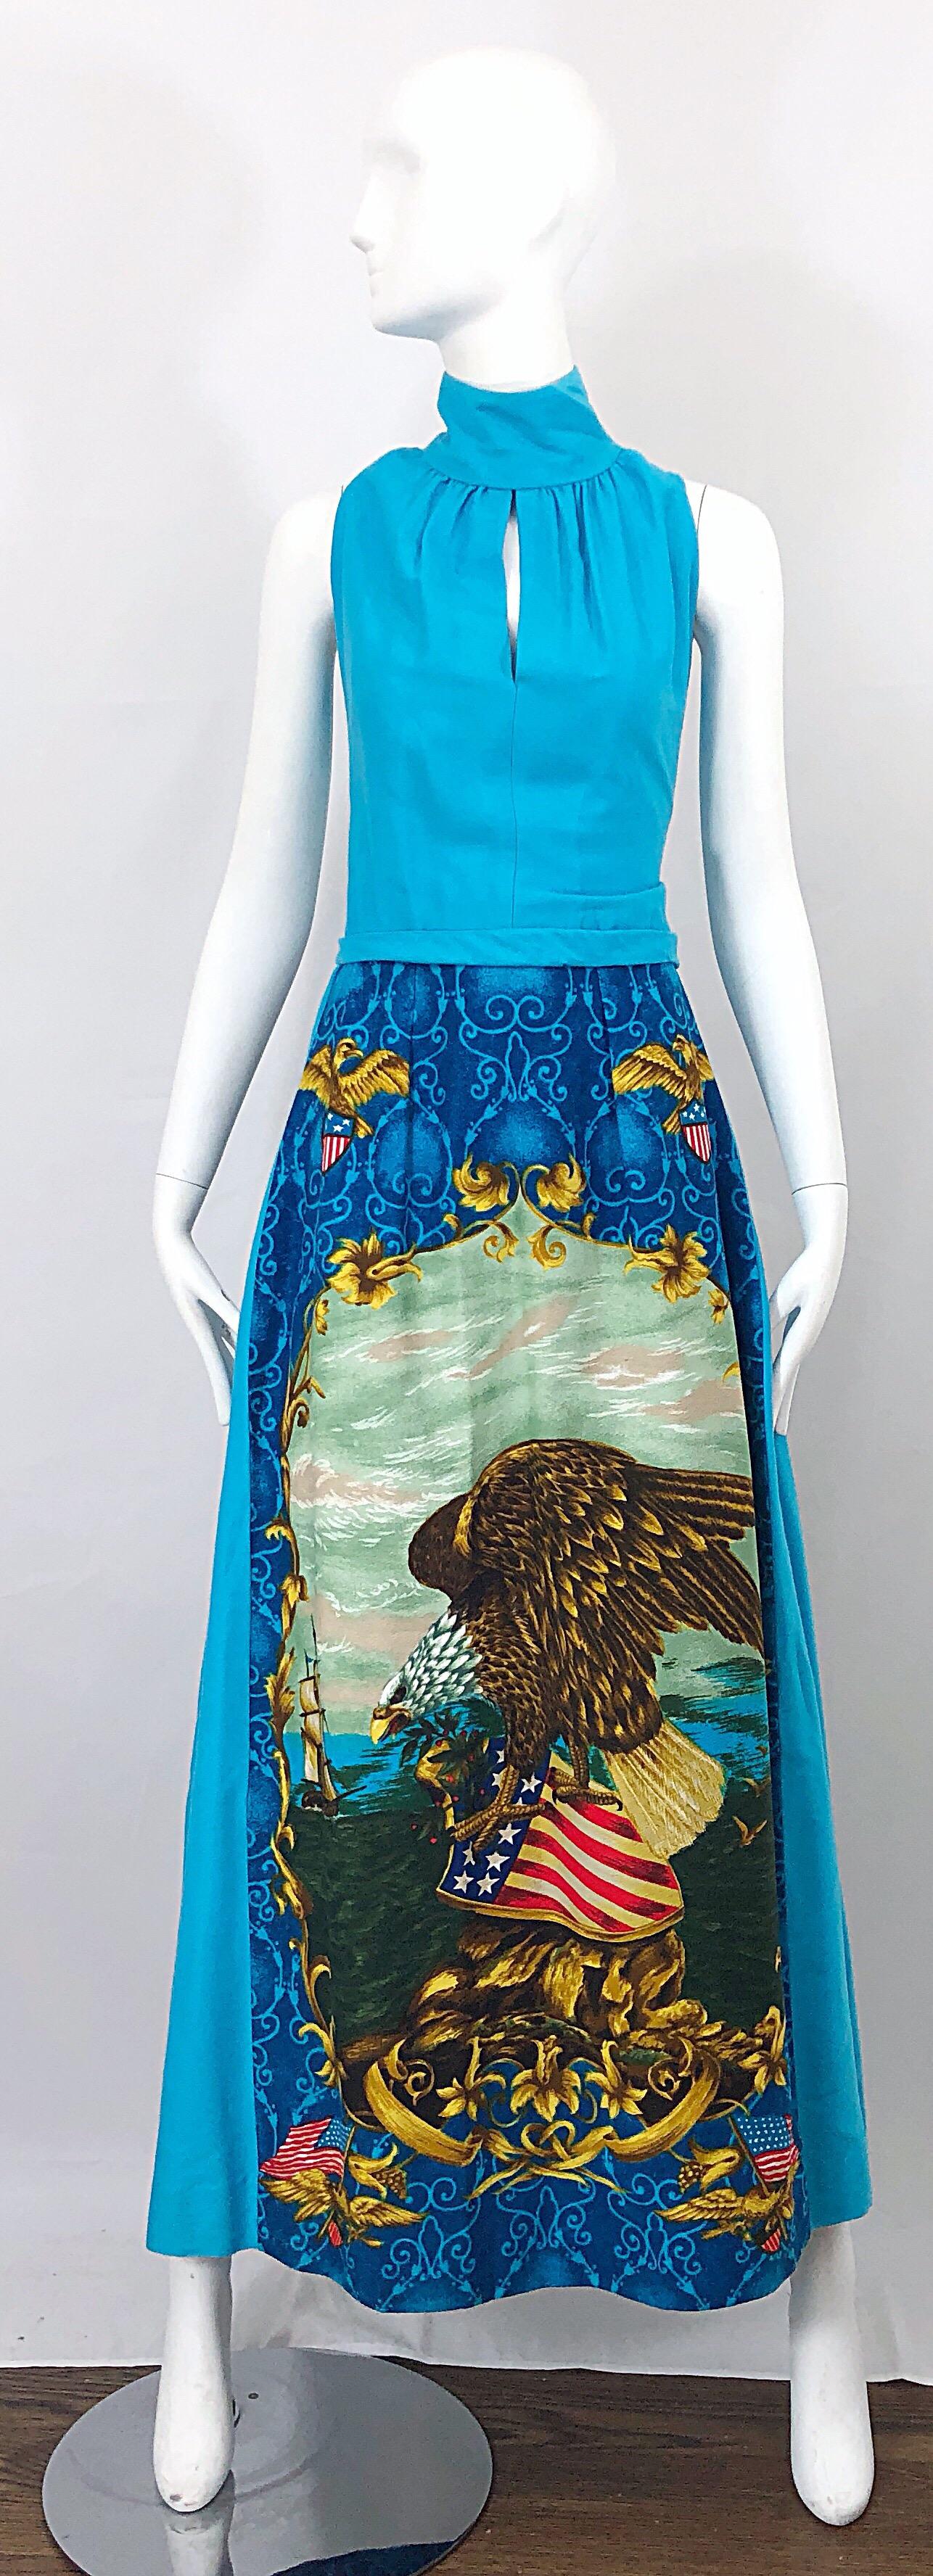 Incredible vintage 1970s patriotic maxi dress! Turquoise blue base, with vibrant colors of red, white, blue and gold throughout. Peek-a-boo cut out above the bust, with a high neck. Print on the front skirt is also on the back skirt. Soft felt